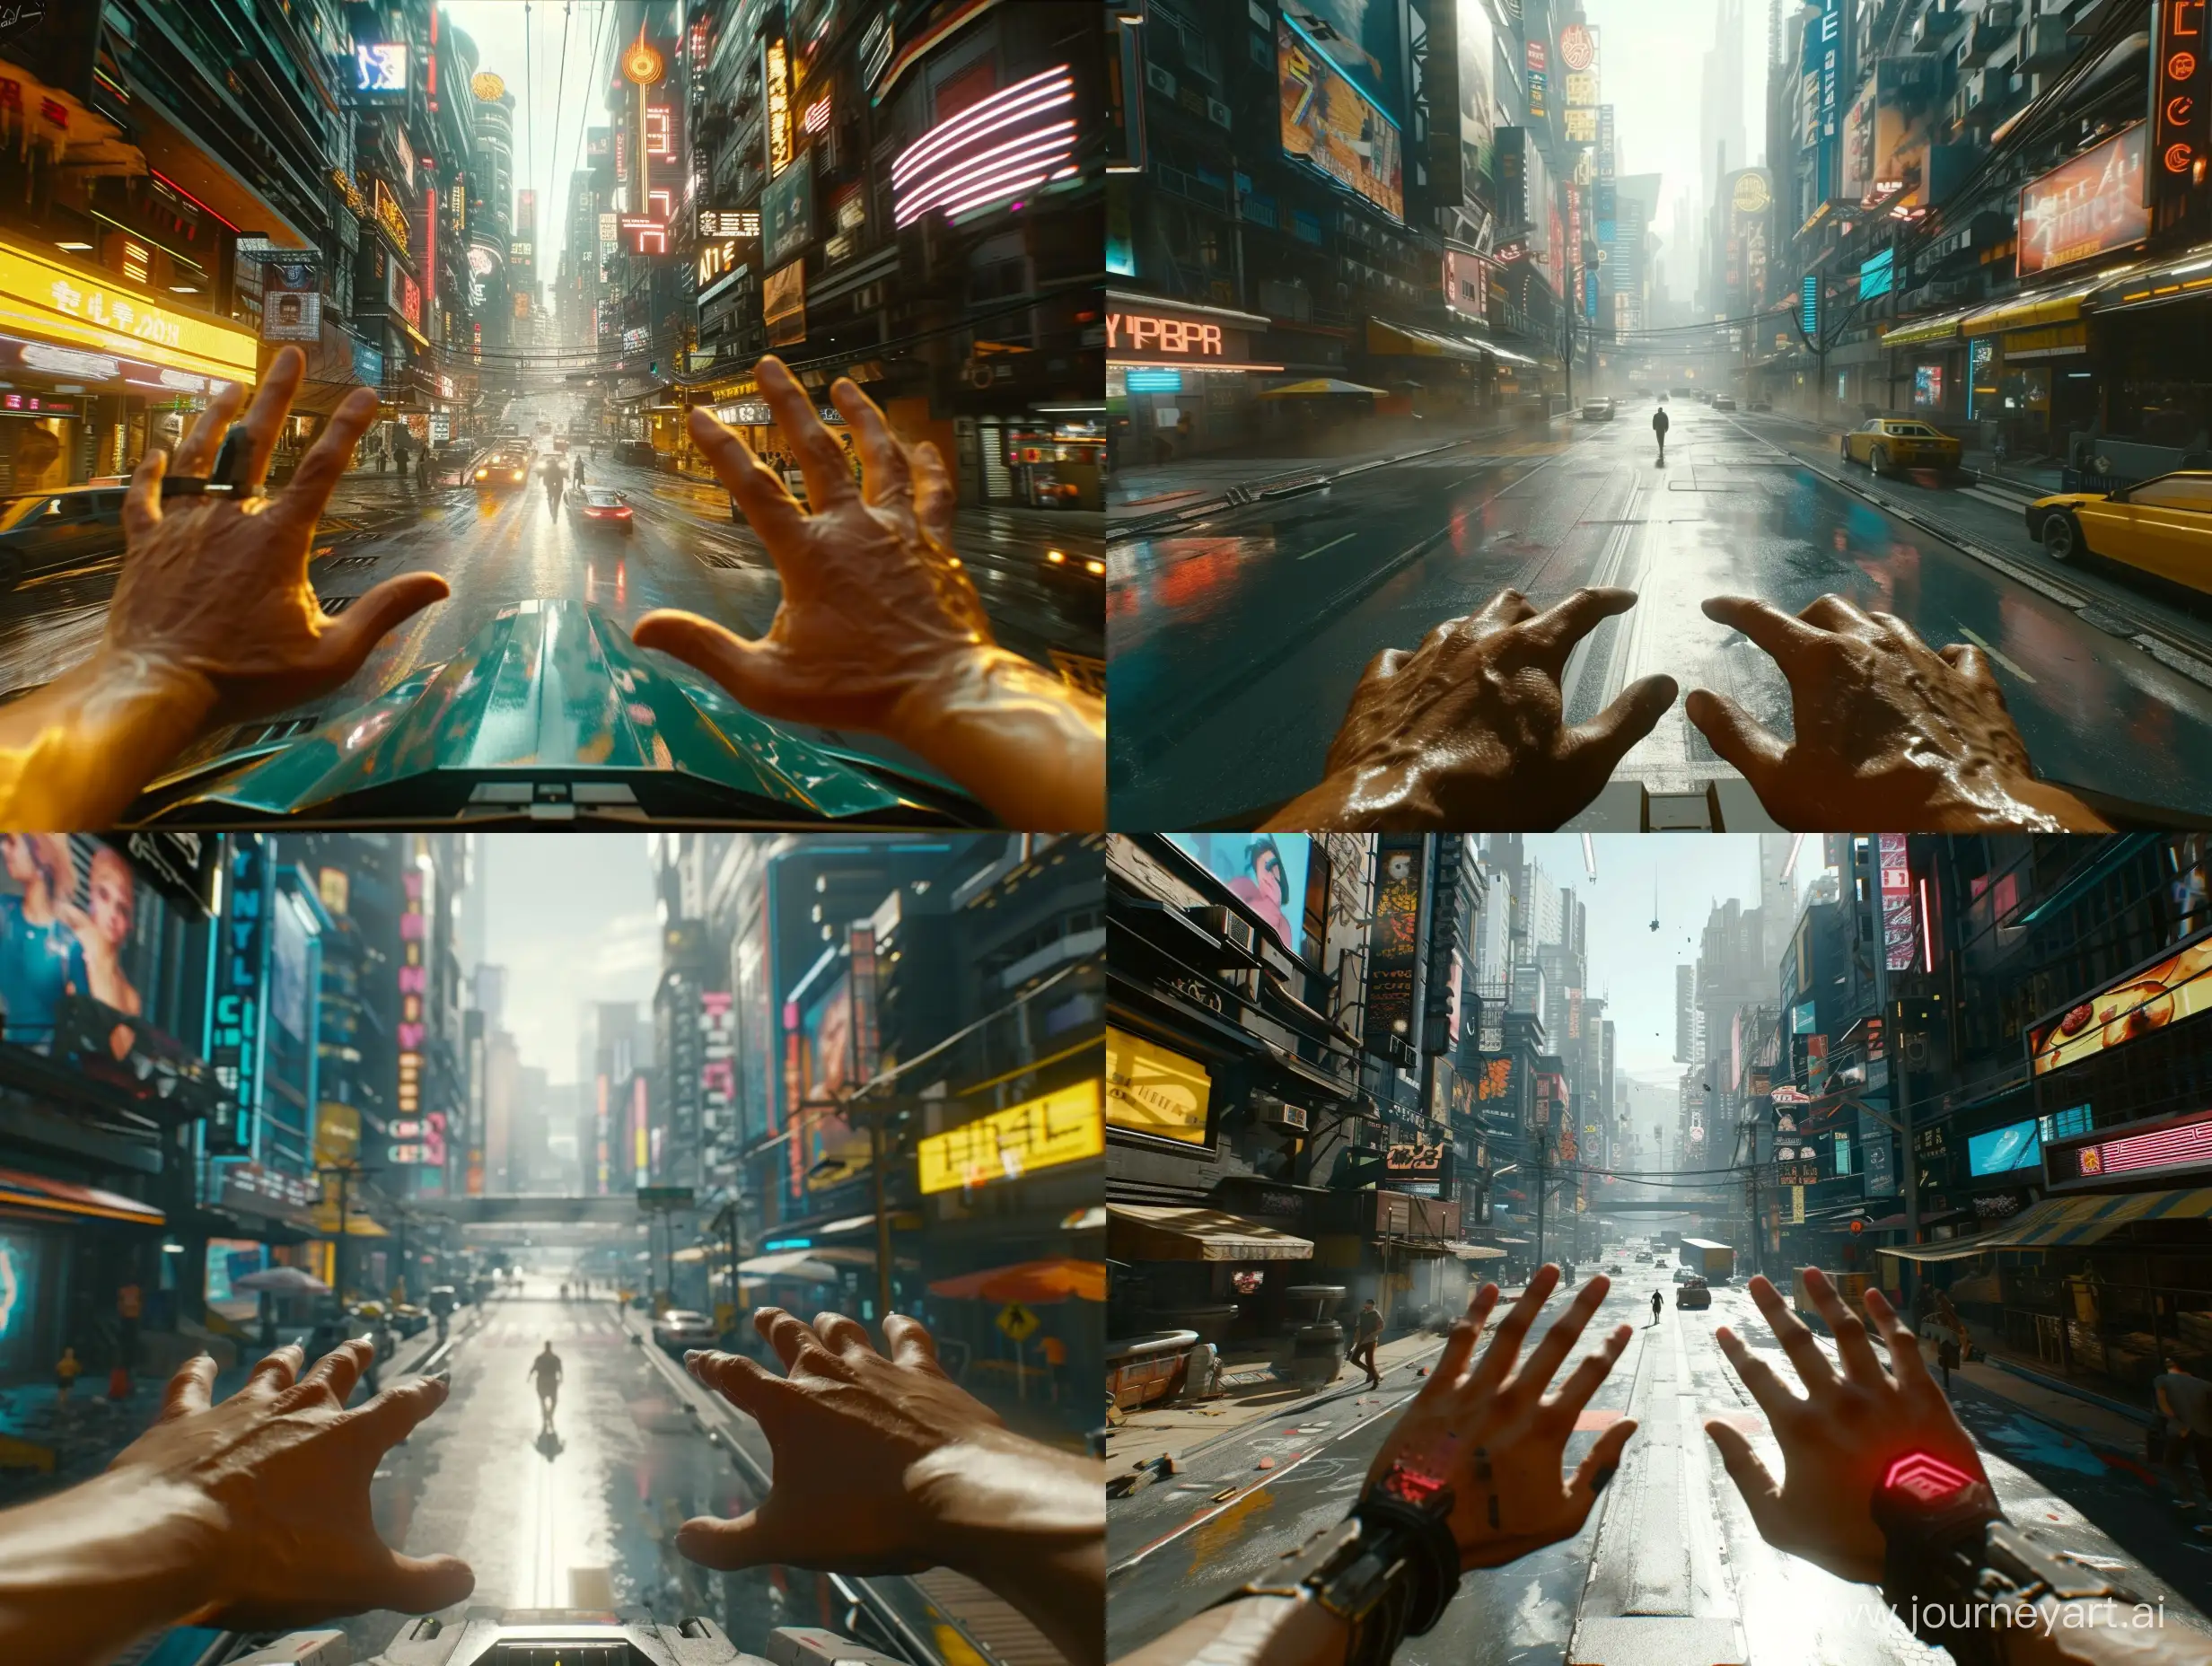 The perspective of the player in the video game "Cyberpunk 2077" shows walking on the streets of a futuristic city with hands visible at the bottom and enhanced ray tracing effects. This is on the PS5 platform.